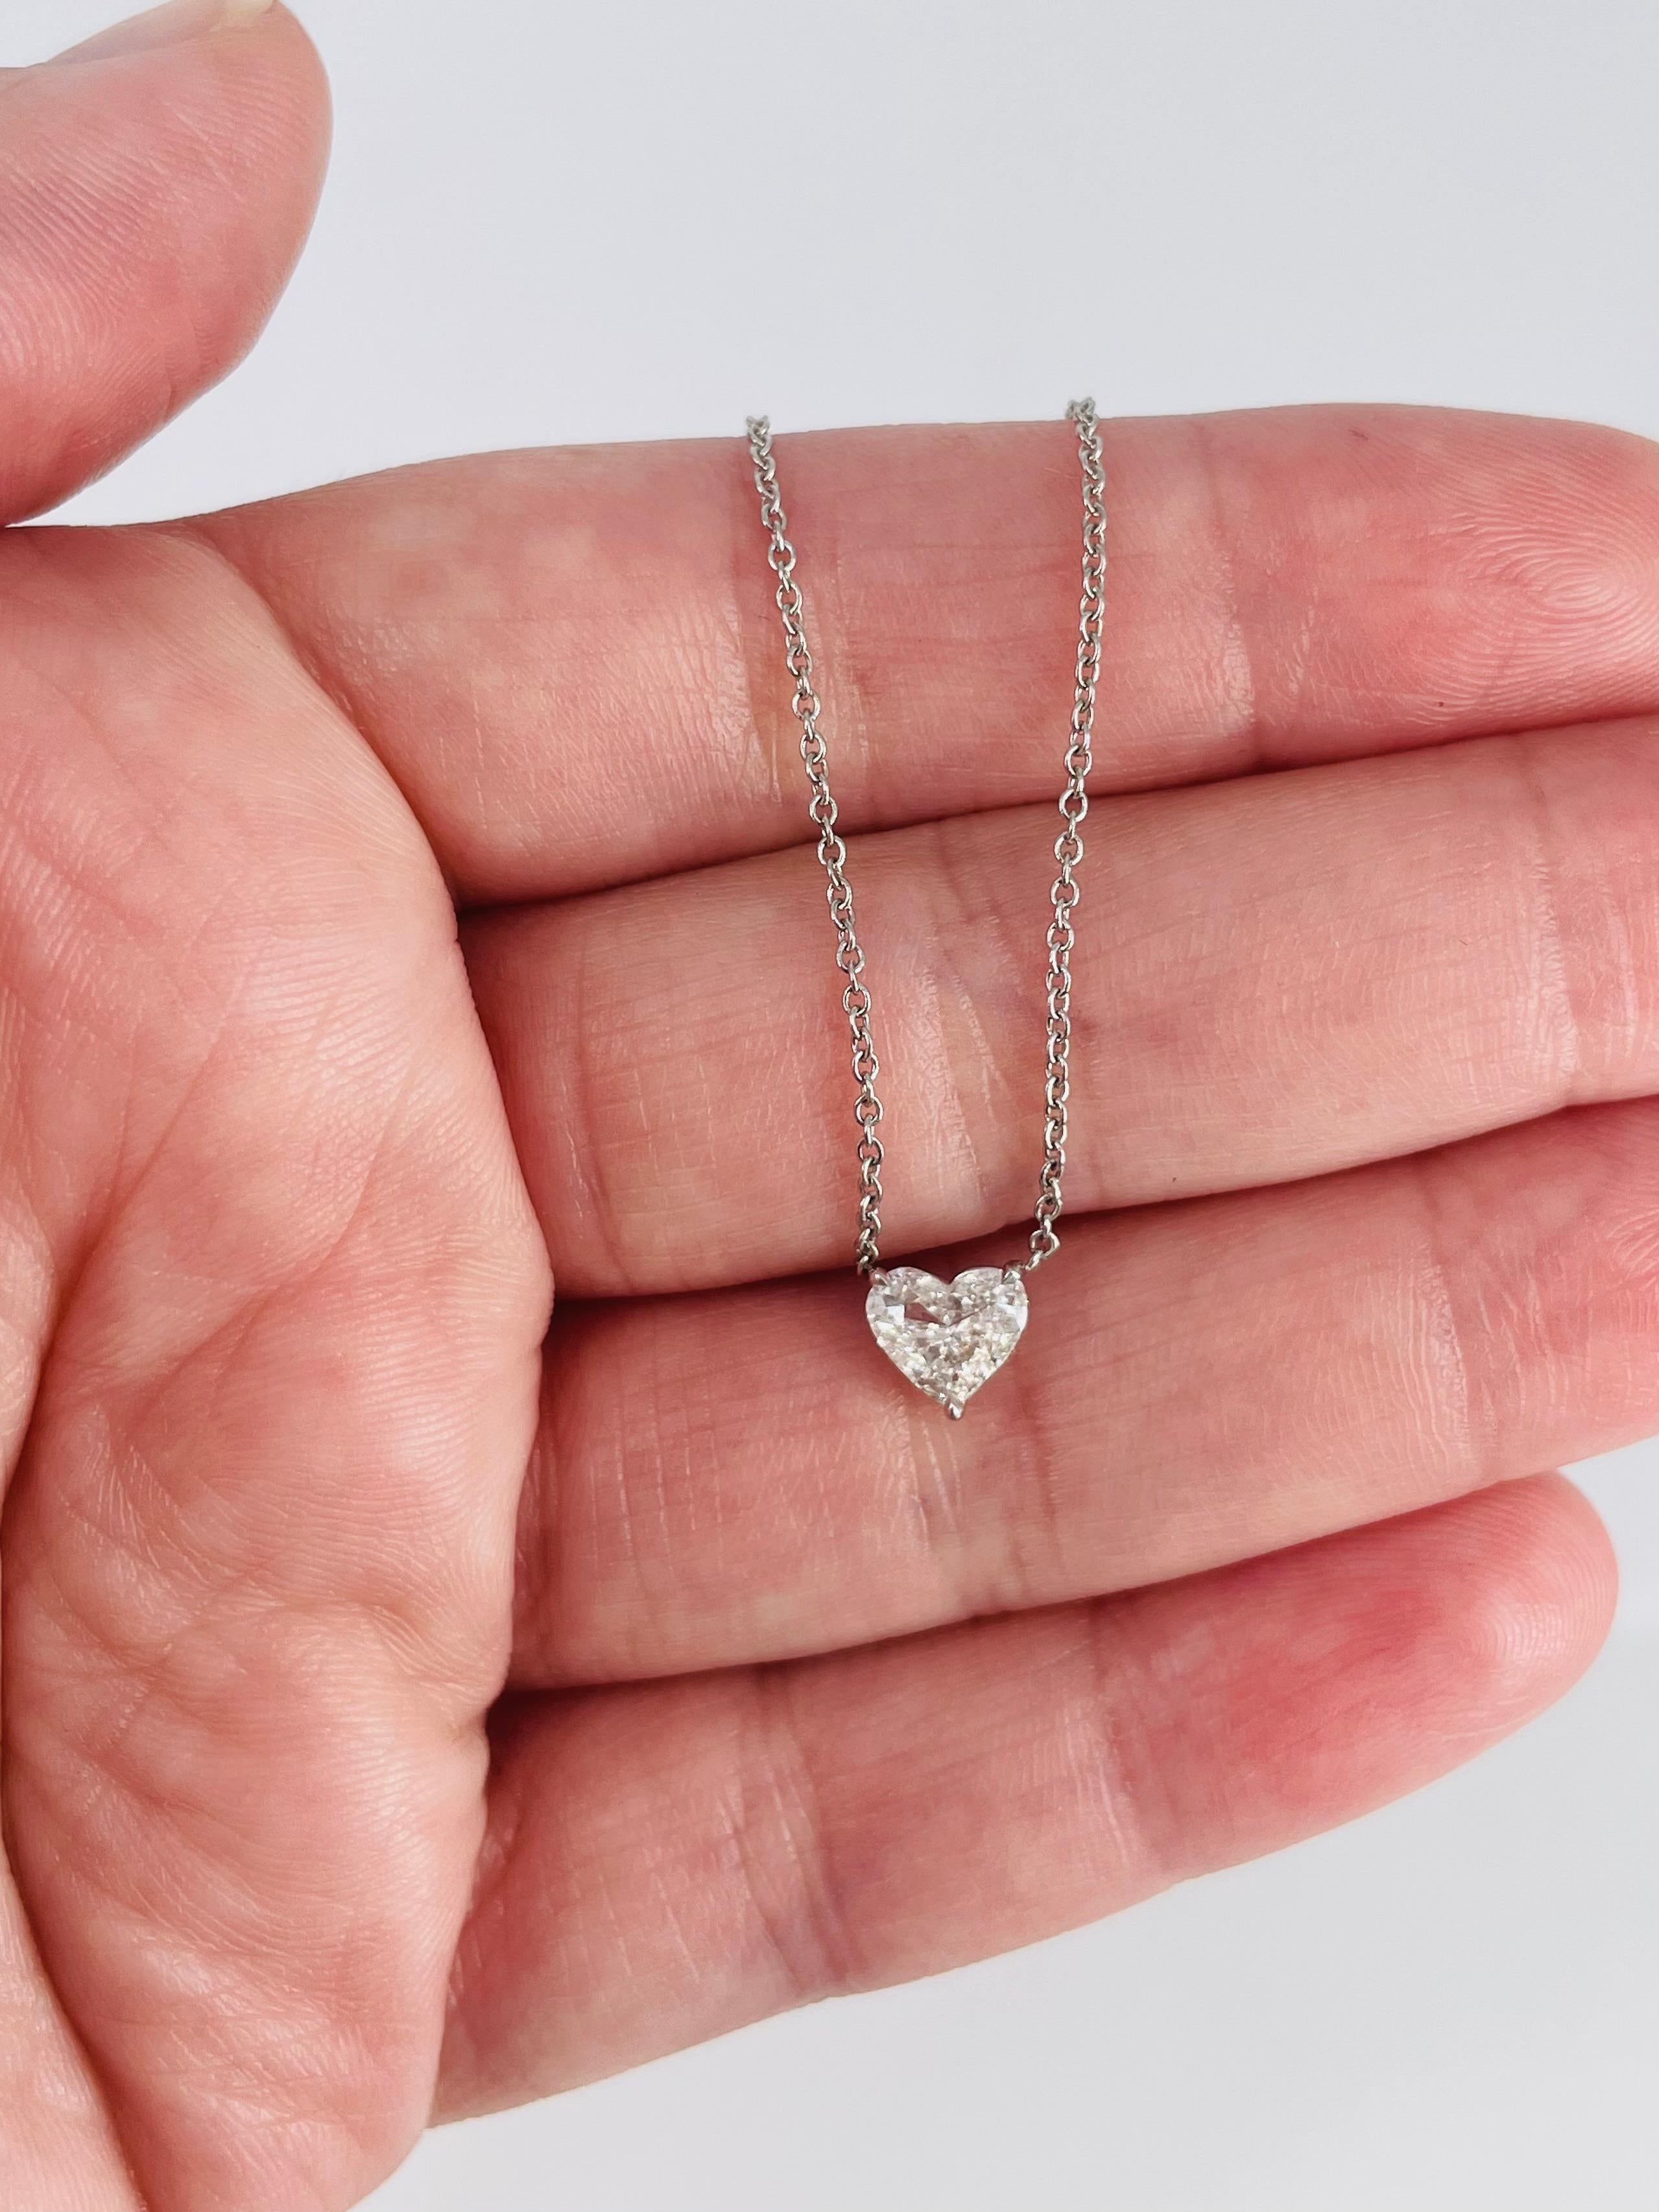 This sweet pendant by J. Birnbach is the perfect everyday piece for yourself or someone you love. The 0.44 carat heart shaped diamond is D color and SI1 clarity, and has a beautiful defined shape. The setting and chain are 18K white gold, and the